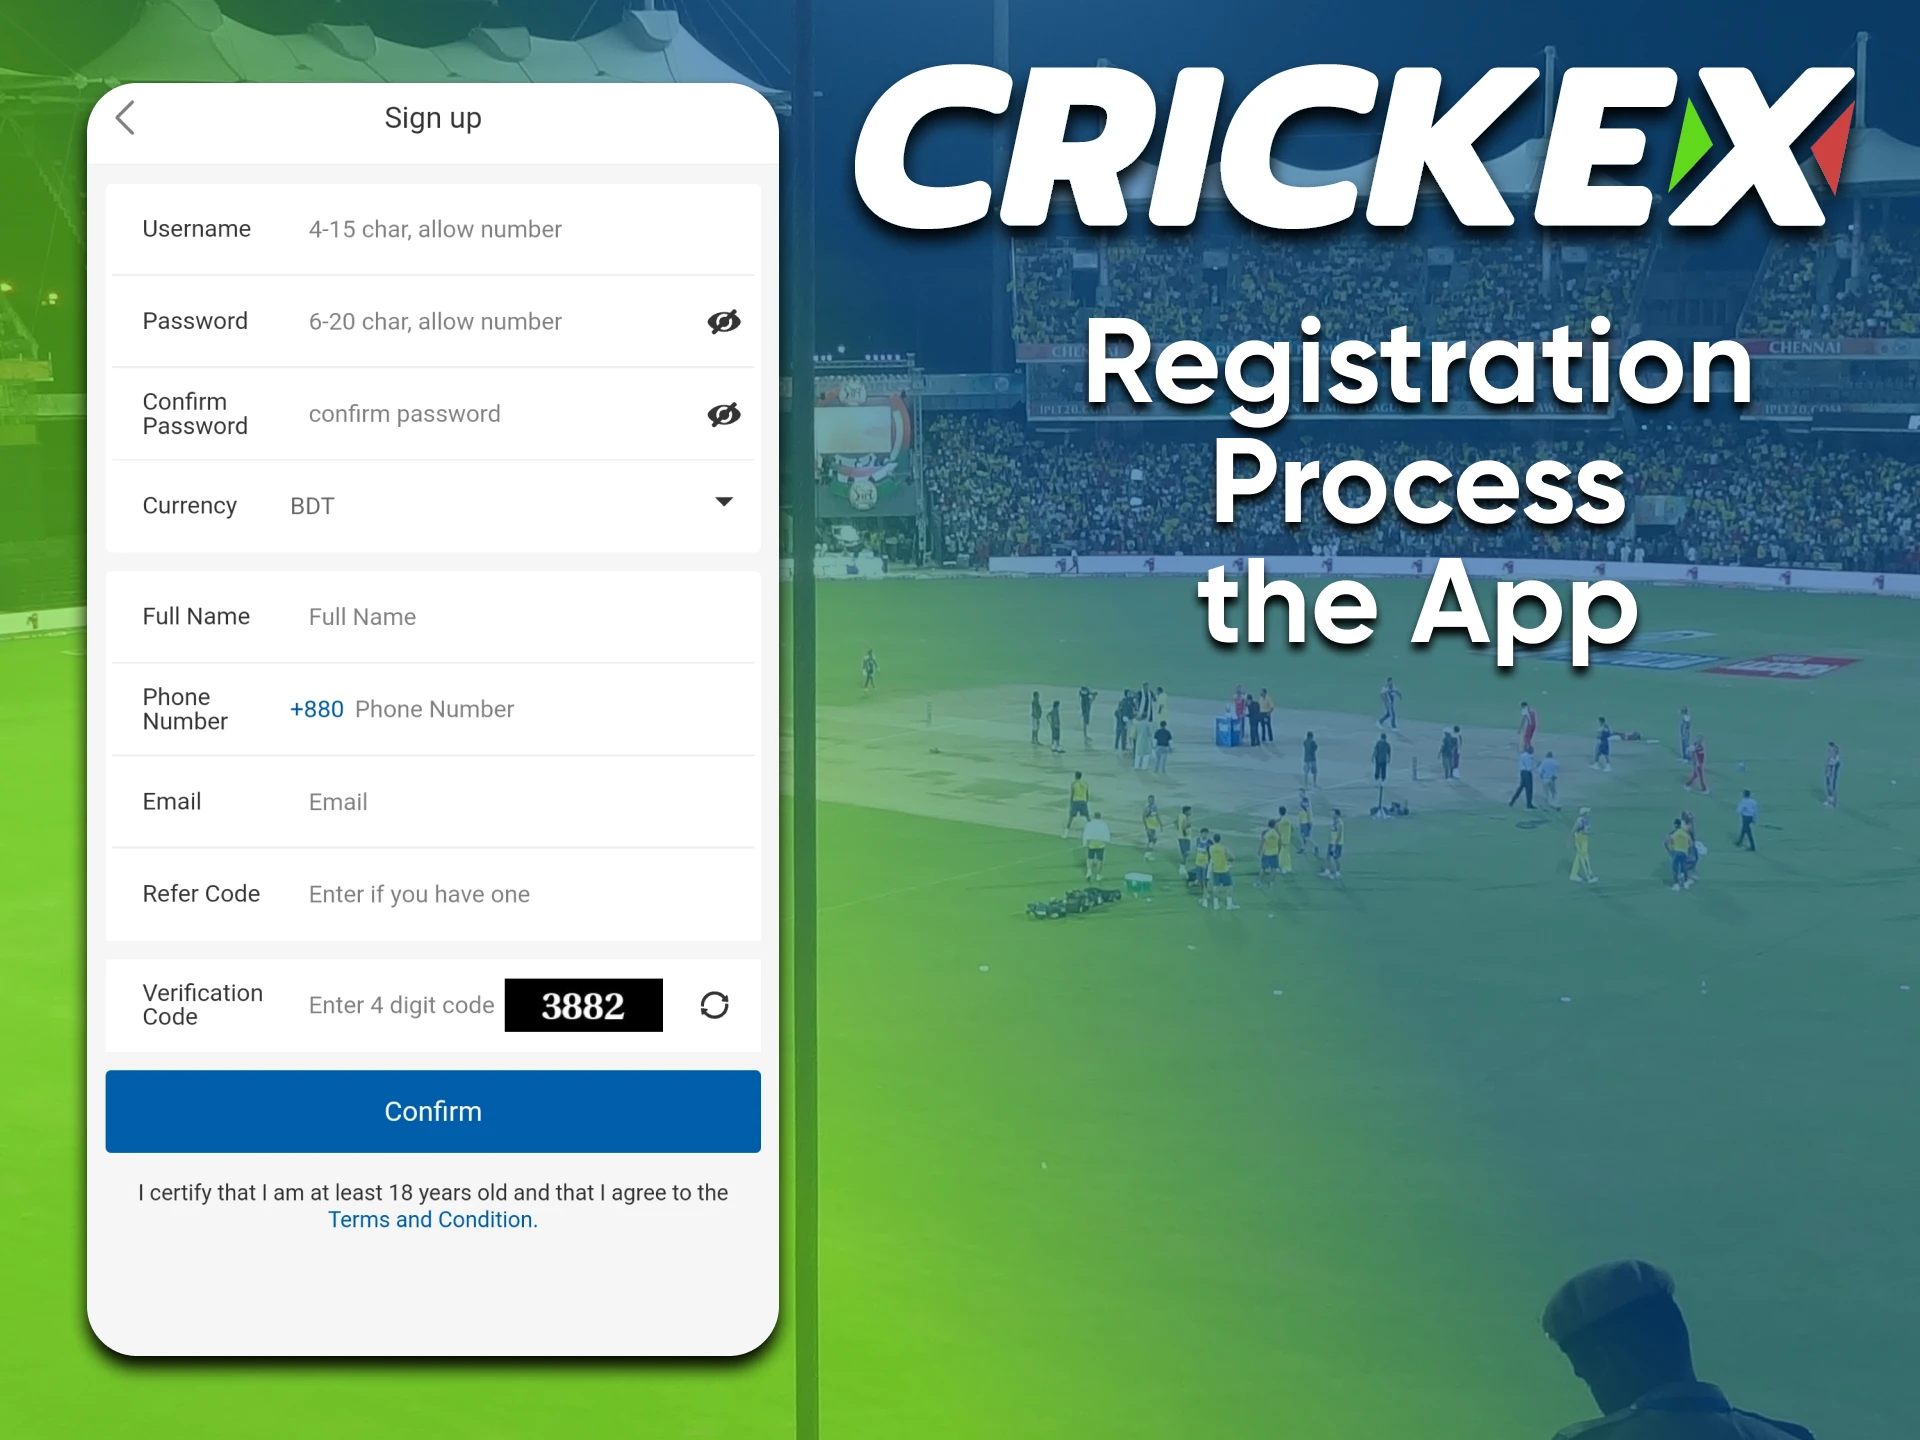 To use the Crickex service on your phone, you need to register in the application.